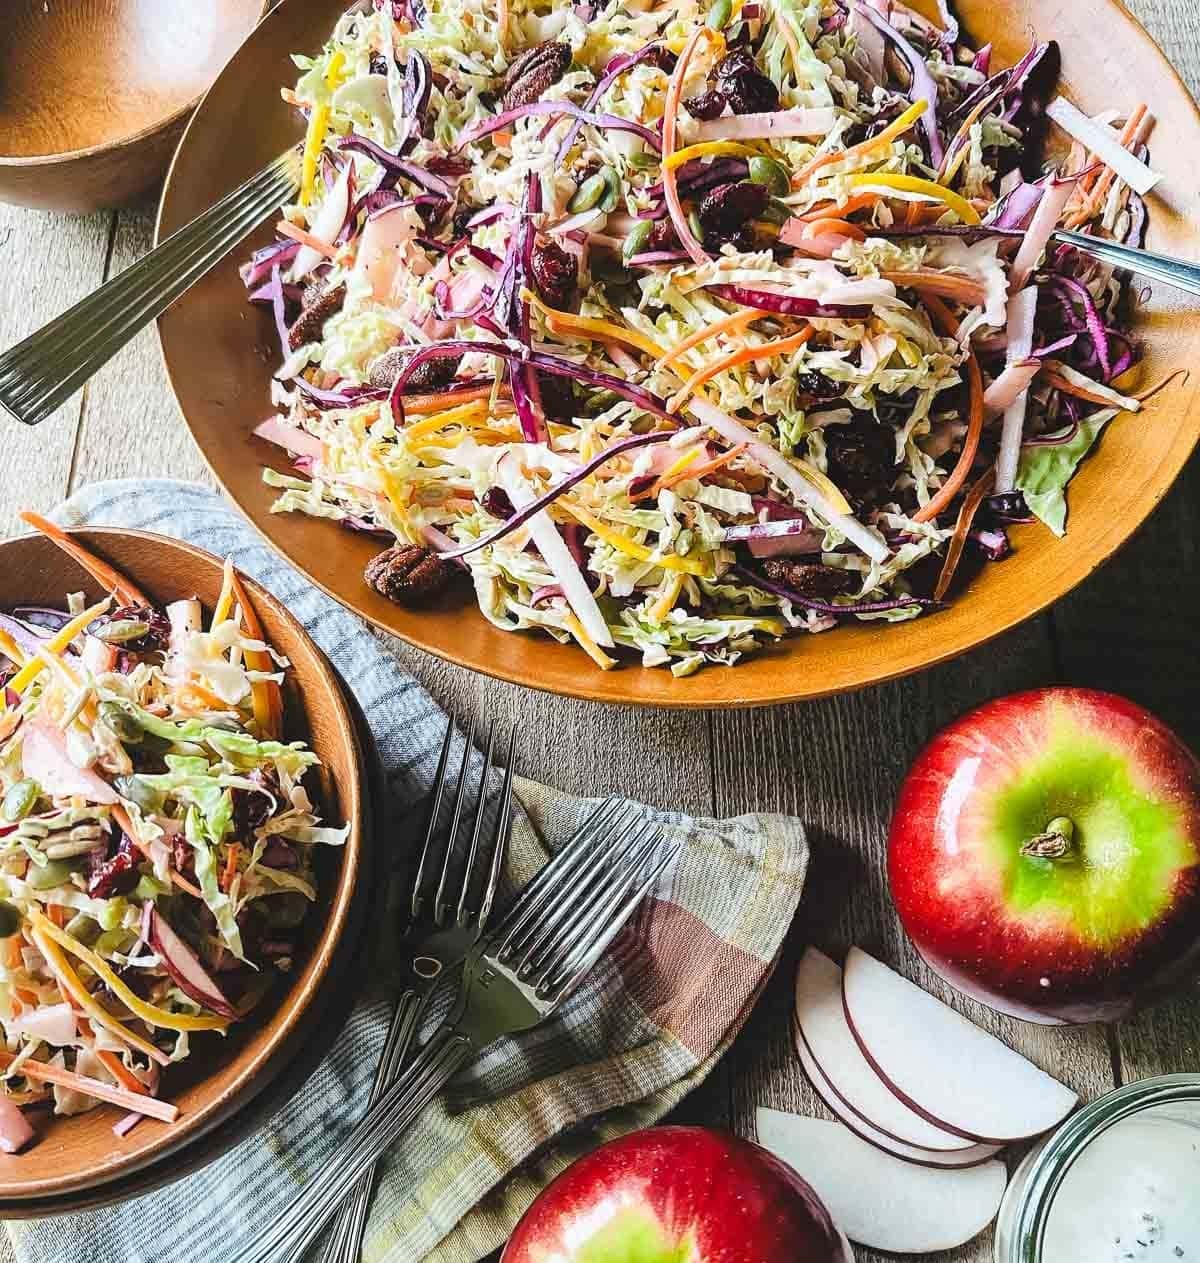 Homemade Carrot-Apple Slaw on a plates with shredded napa cabbage, red cabbage,  golden beets, apples, dried cranberries, pepitas, sunflower seeds and pecans